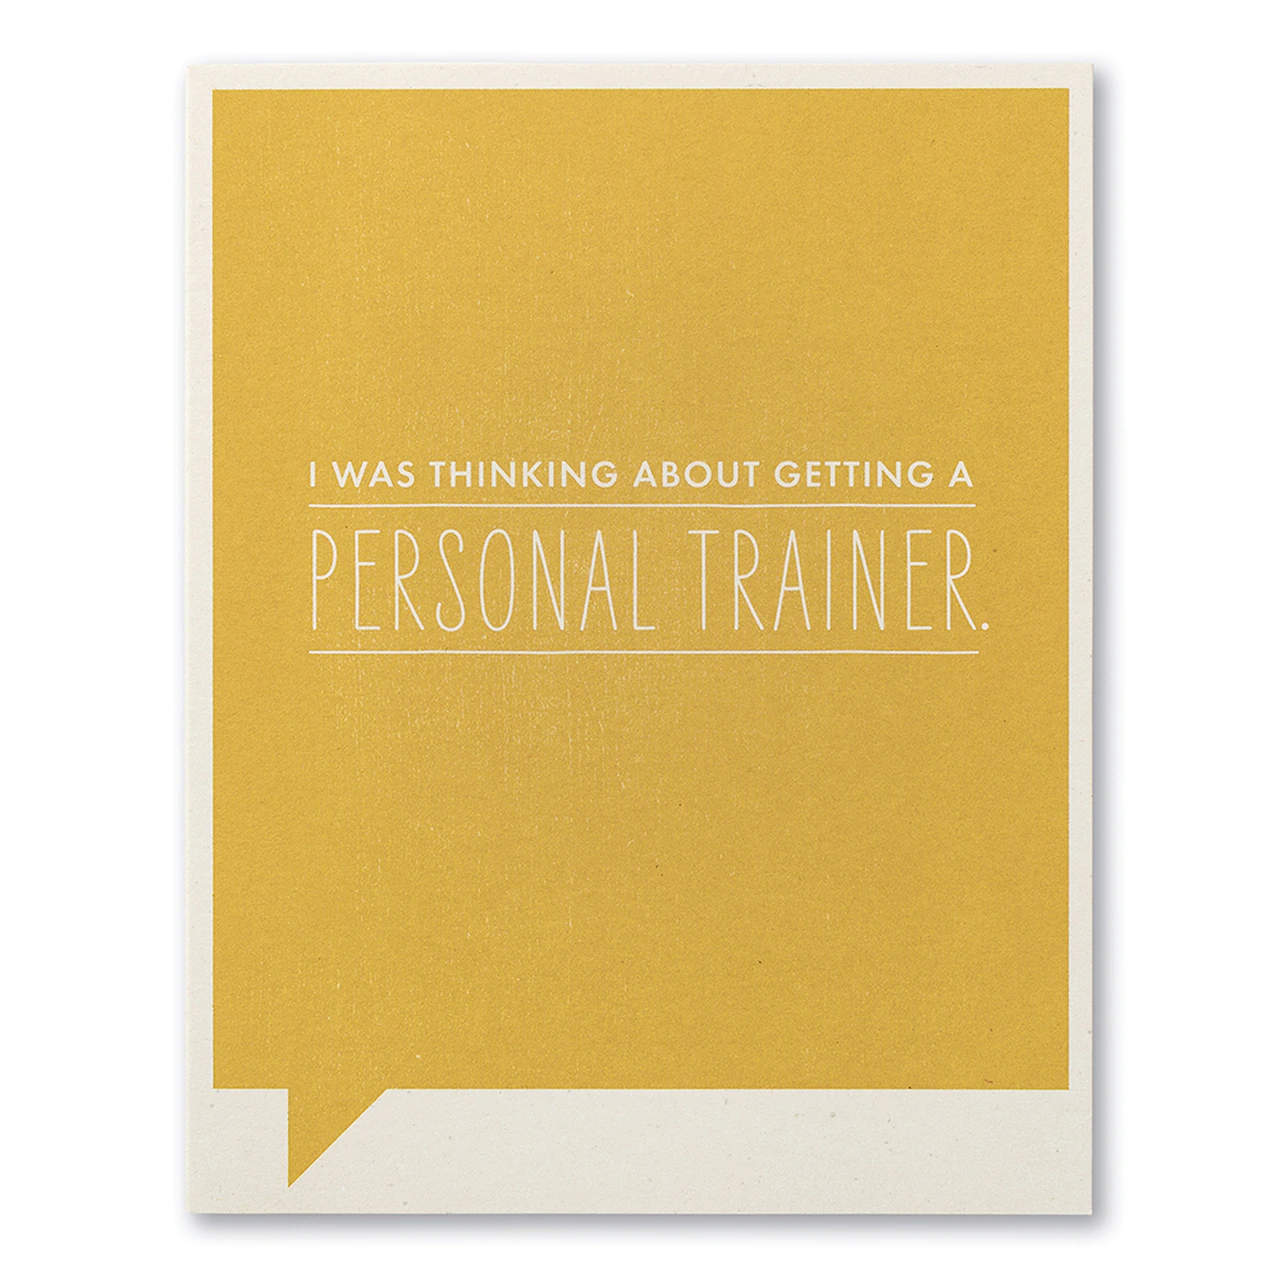 Frank and Funny Greeting Card - Humor - I Was Thinking Of Getting A Personal Trainer - Mellow Monkey